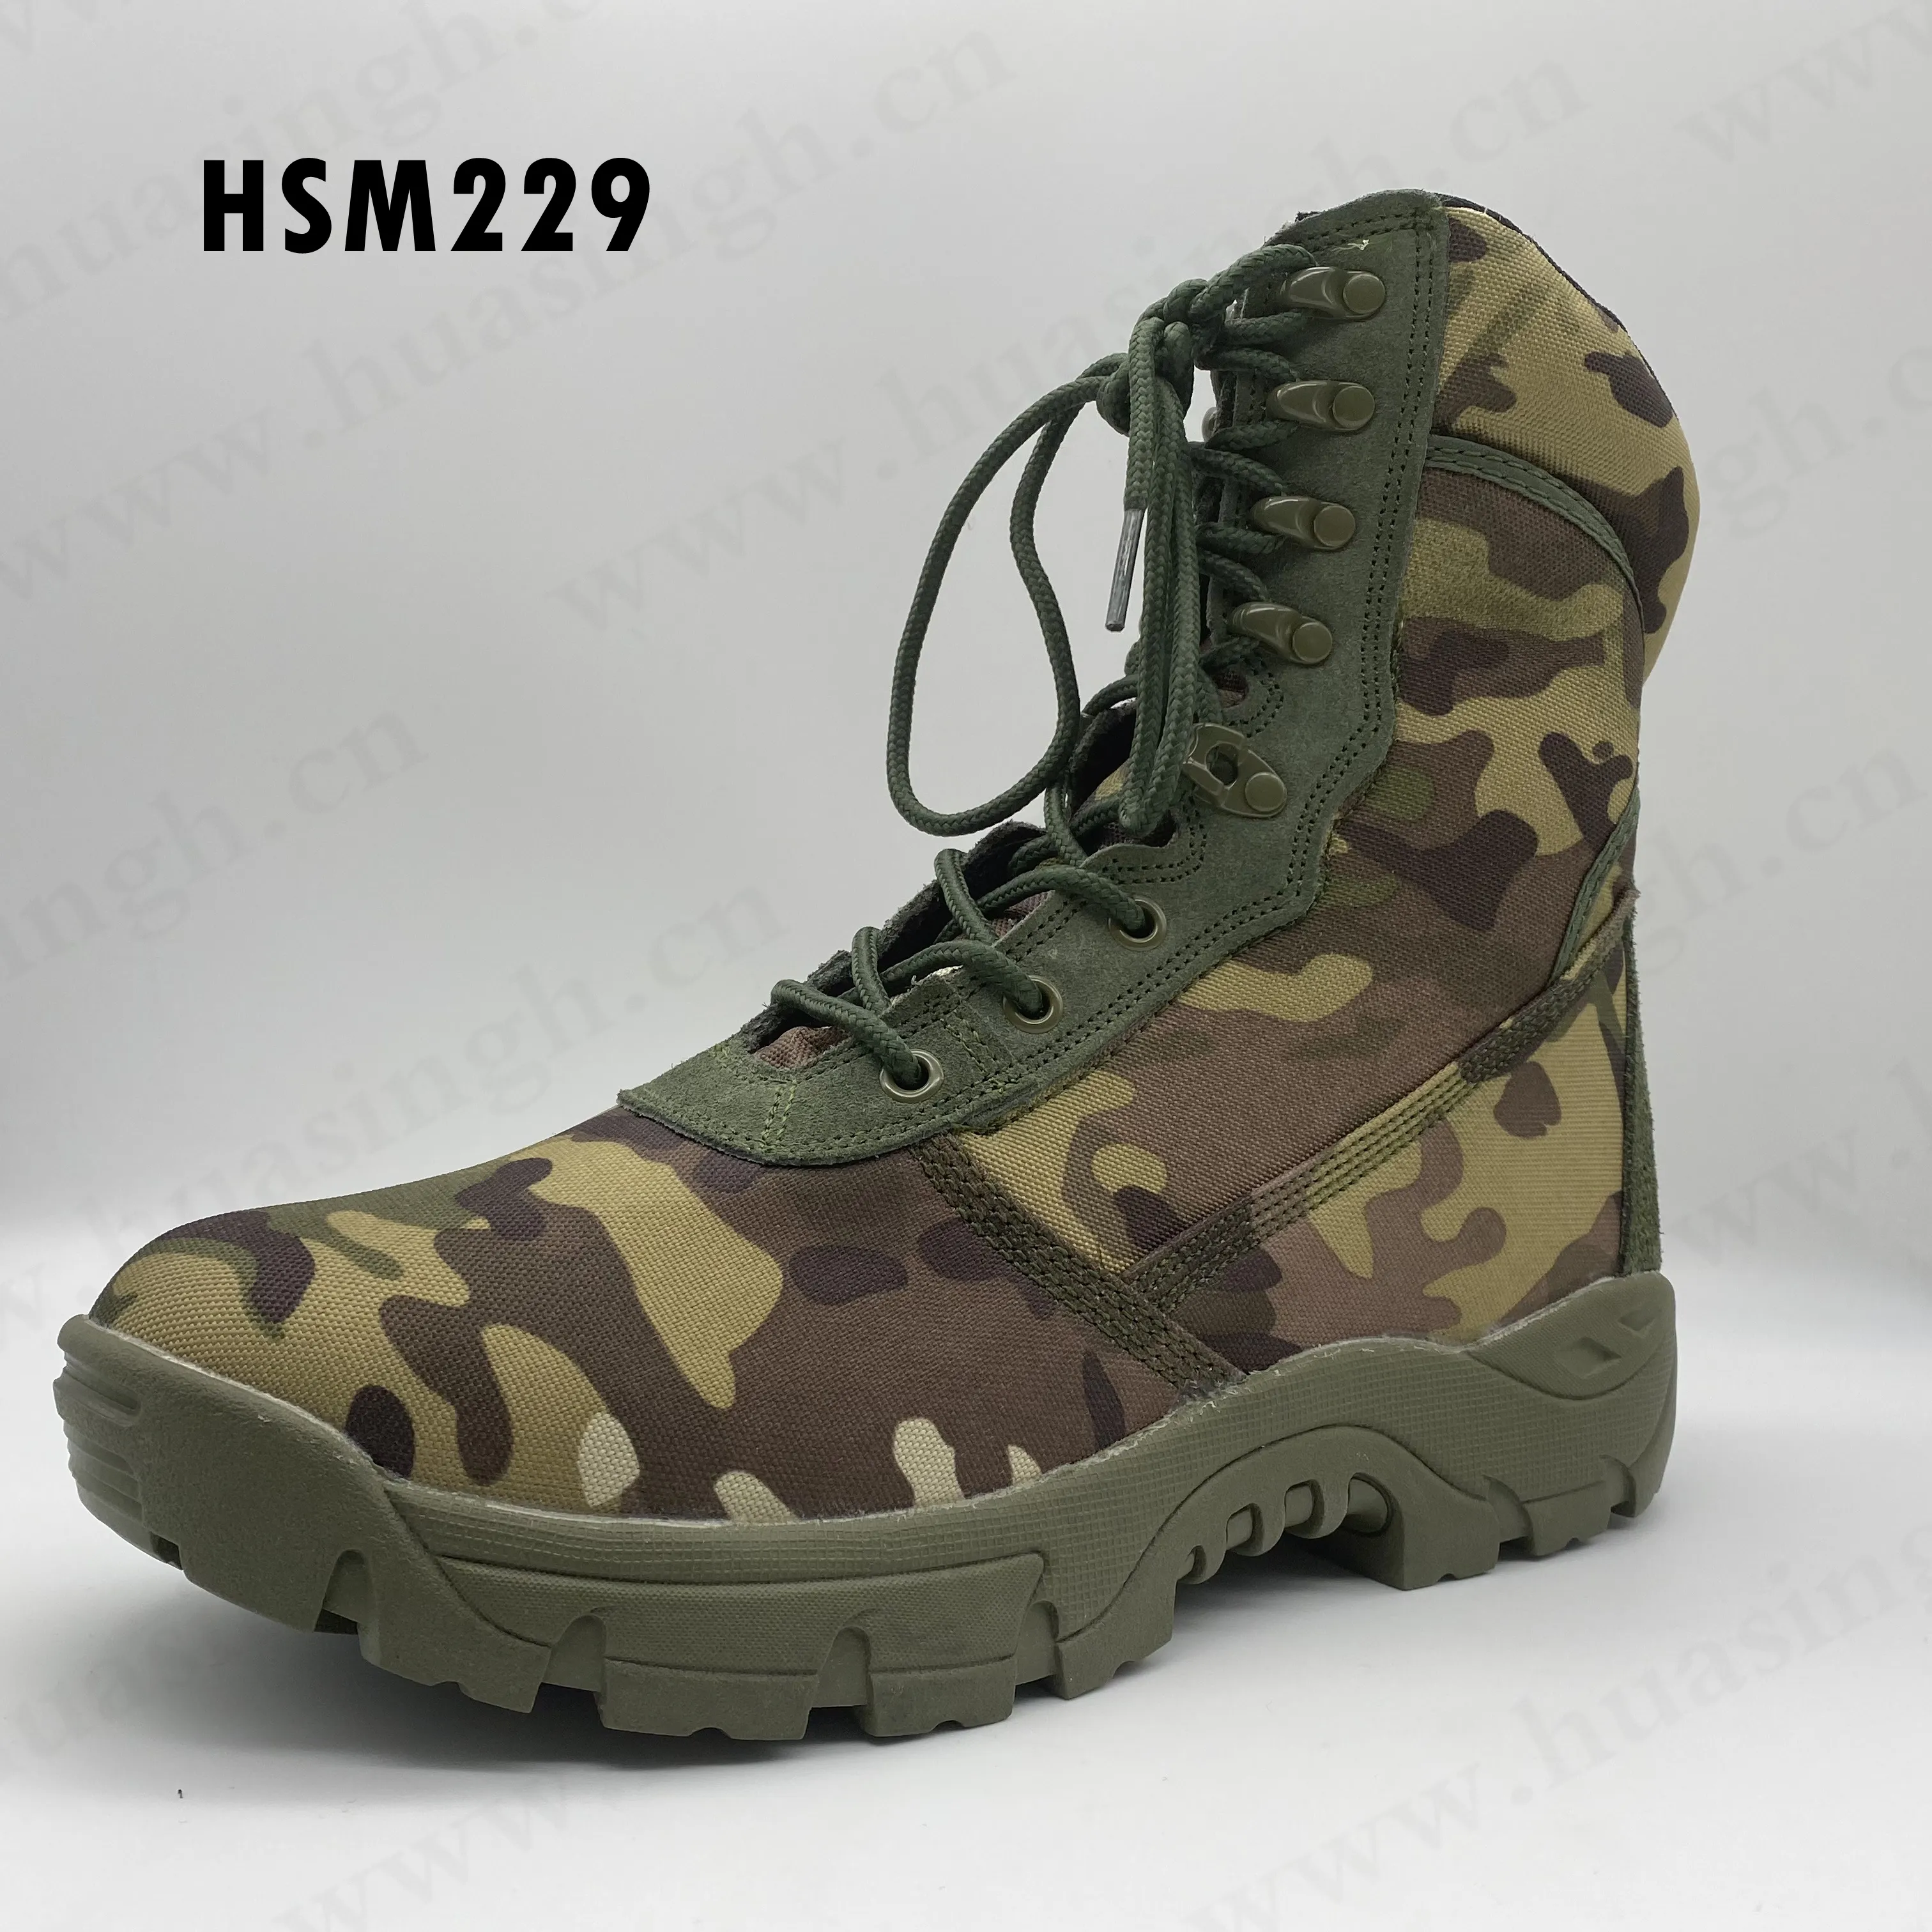 YWQ,easy hidden camouflage fabric combat boots air hole design 6 inch tactical boots with side zipper HSM229